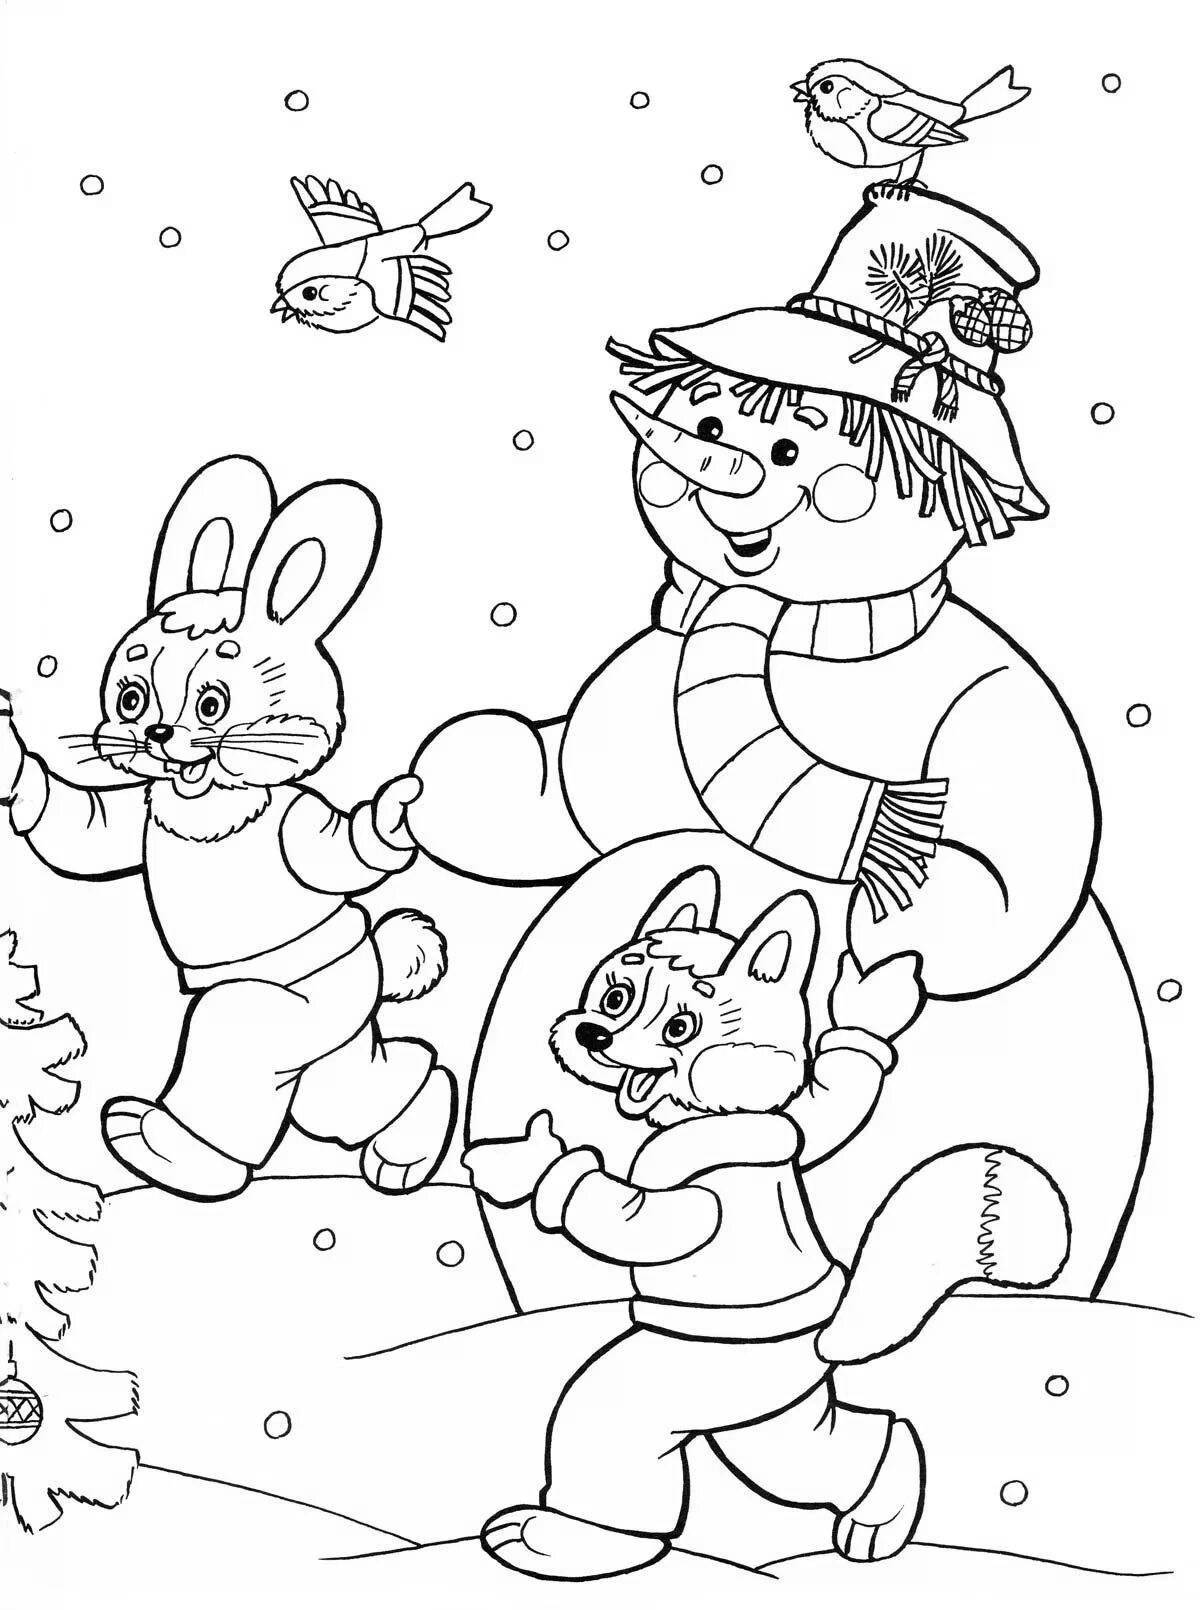 Bright coloring page 4 5 years of winter